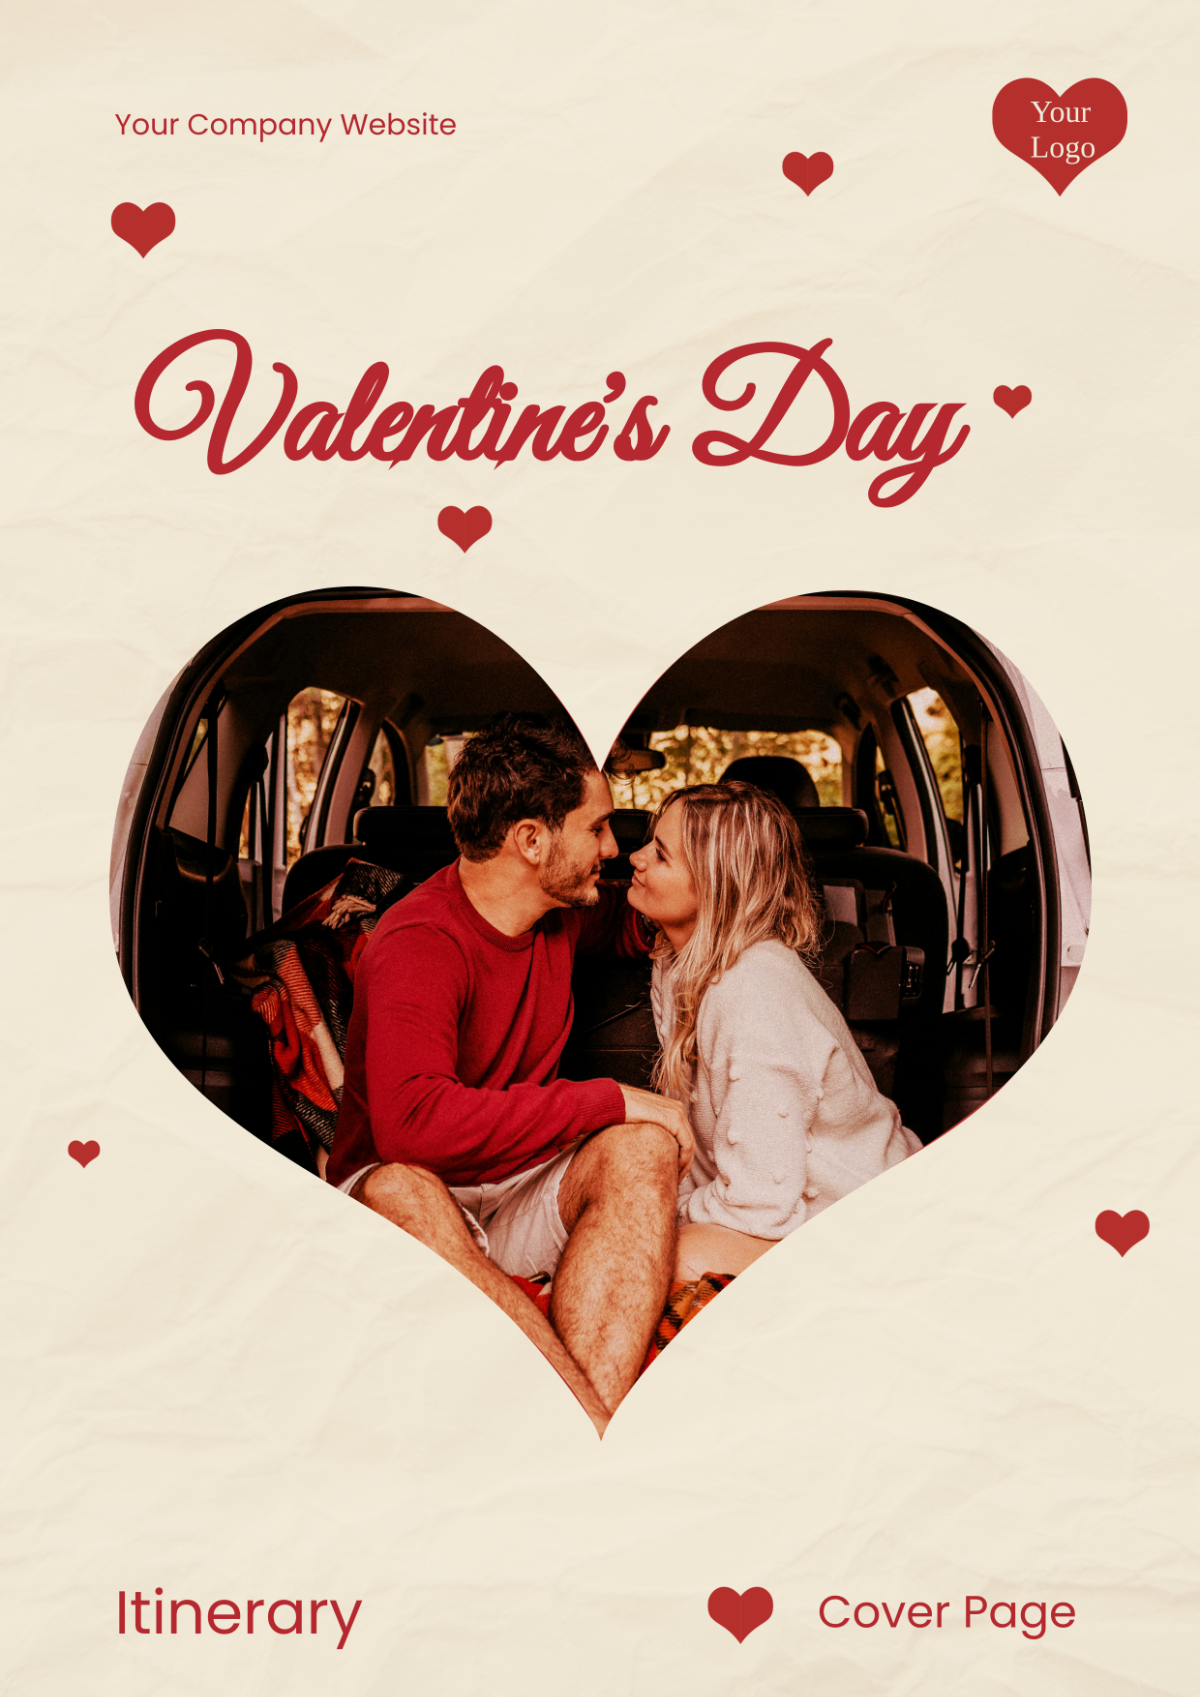 Free Valentine's Day Itinerary Cover Page Template